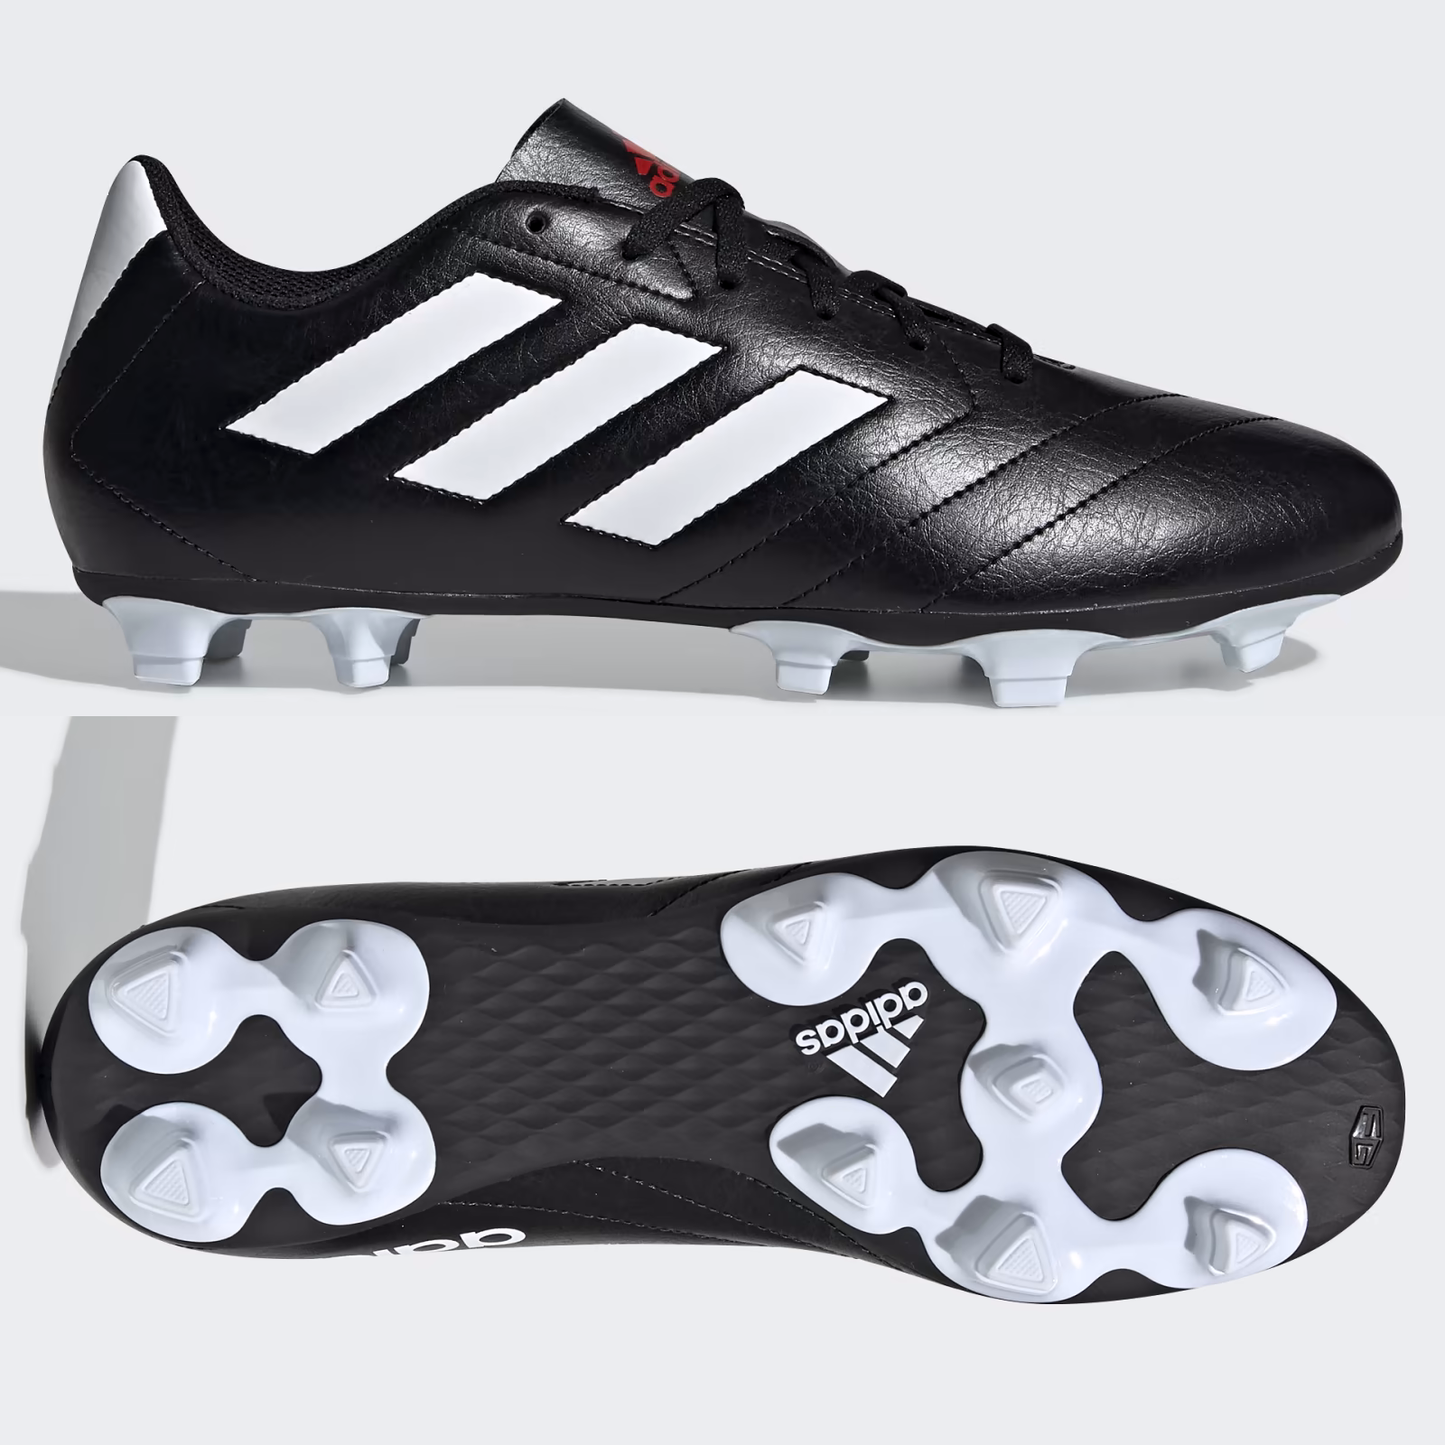 adidas Goletto VII FG Mens Football Boots Black SIZE 9 Firm Ground Moulded